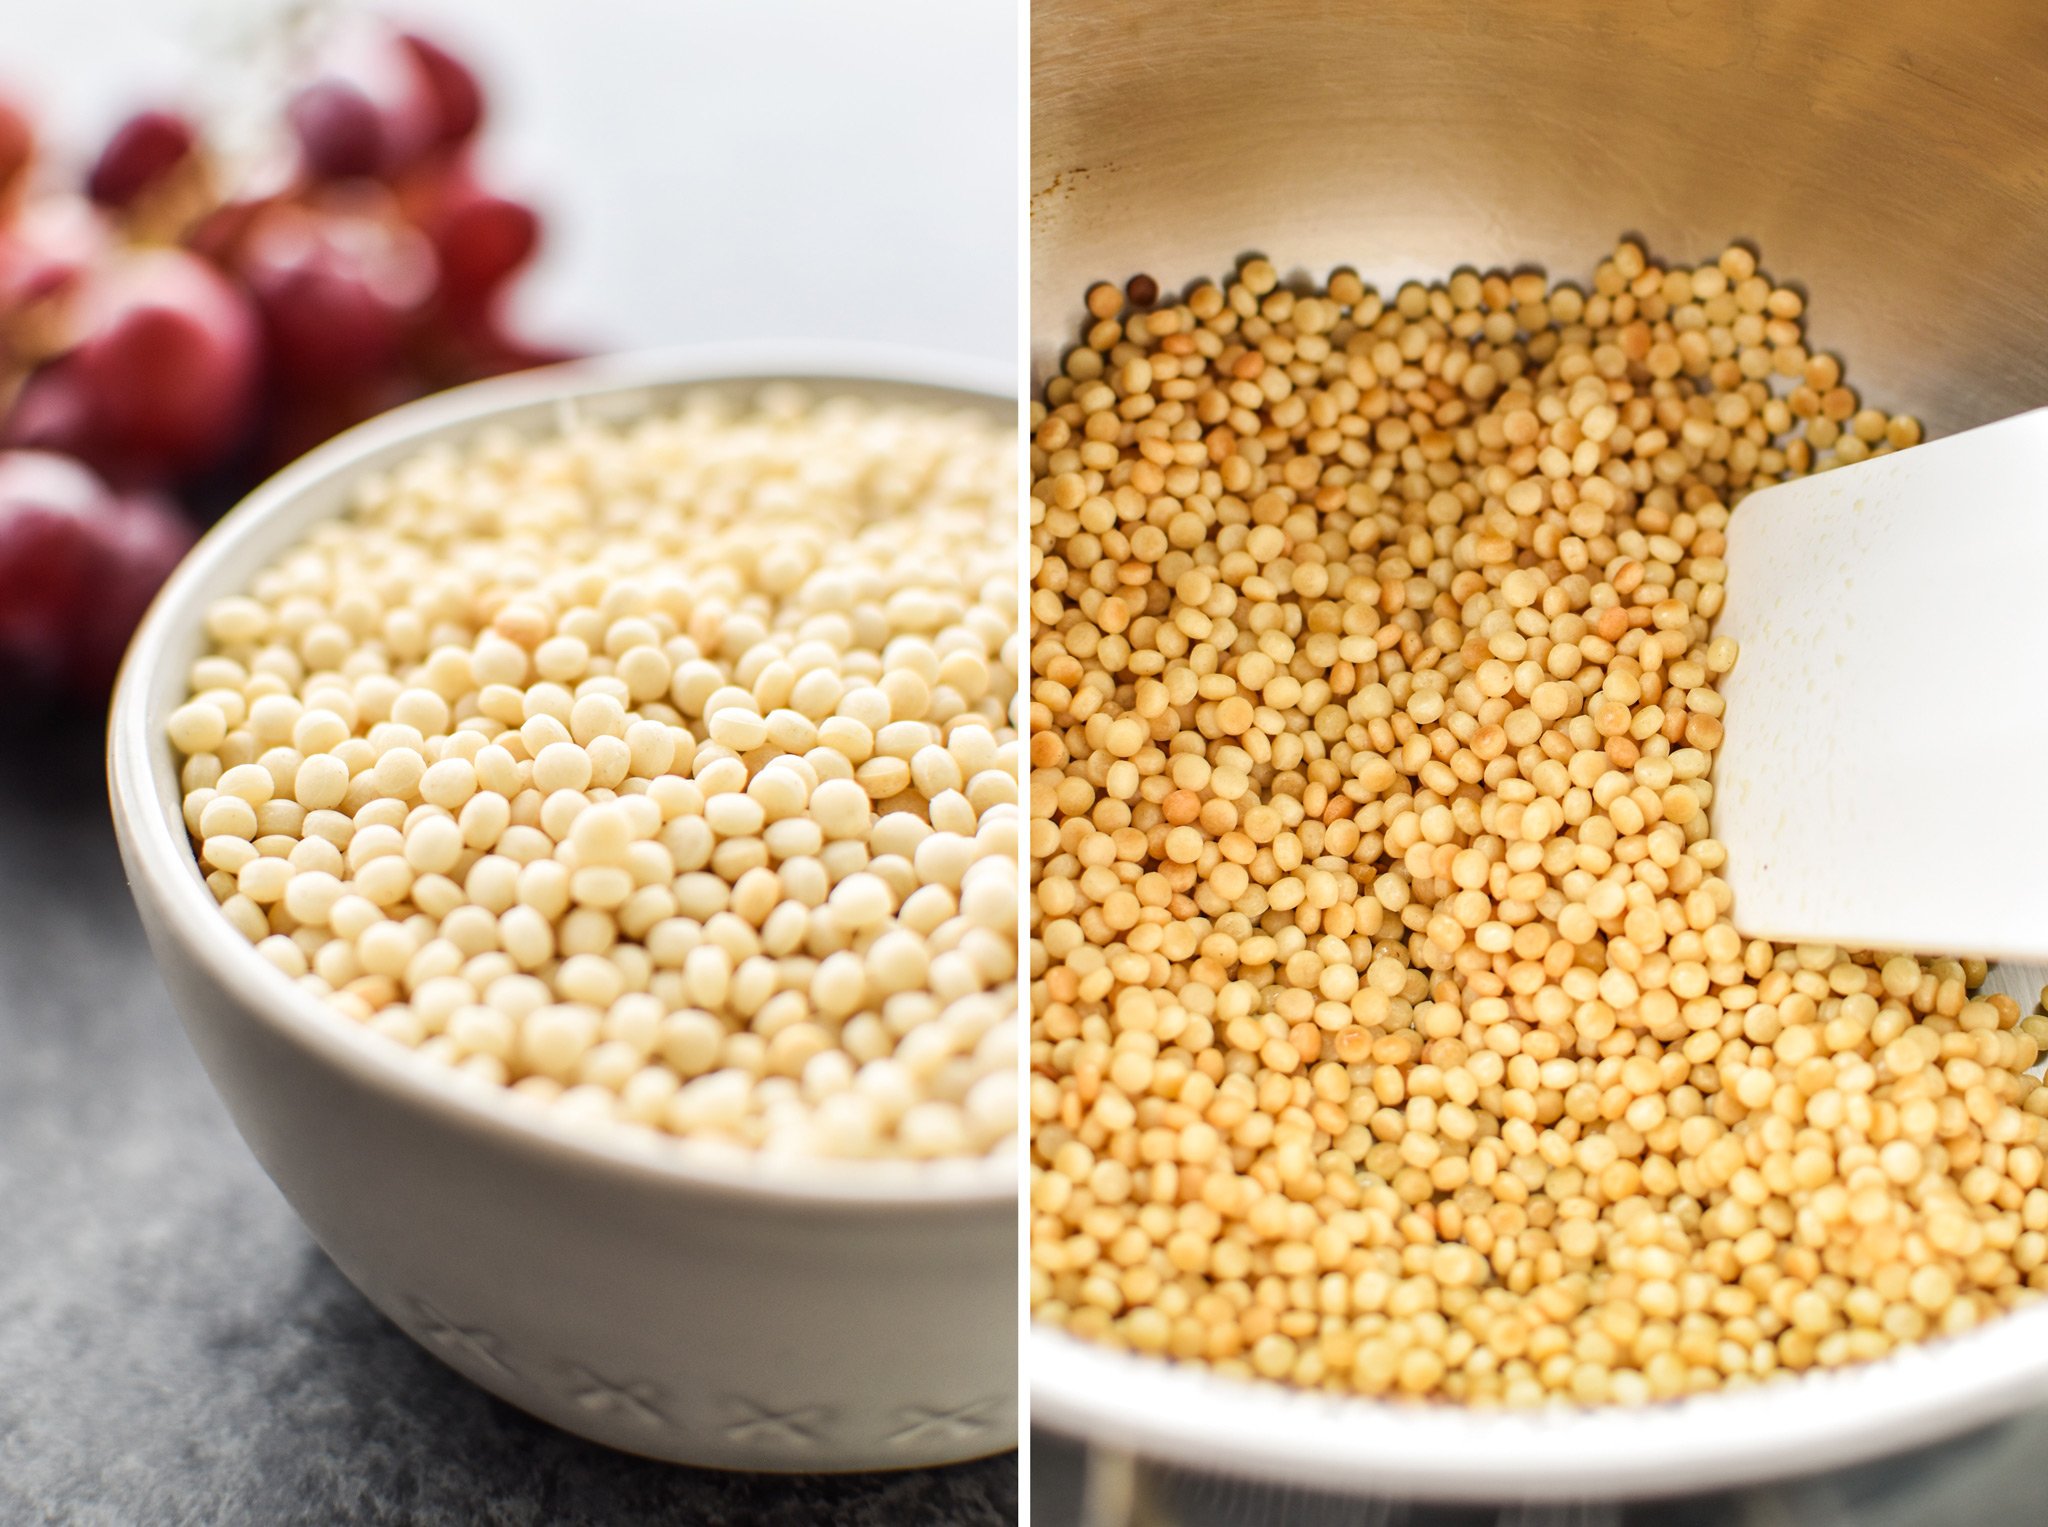 Left: Couscous before cooking, measured in a 1 cup bowl. Right: Quinoa during toasting in a pan with olive oil.